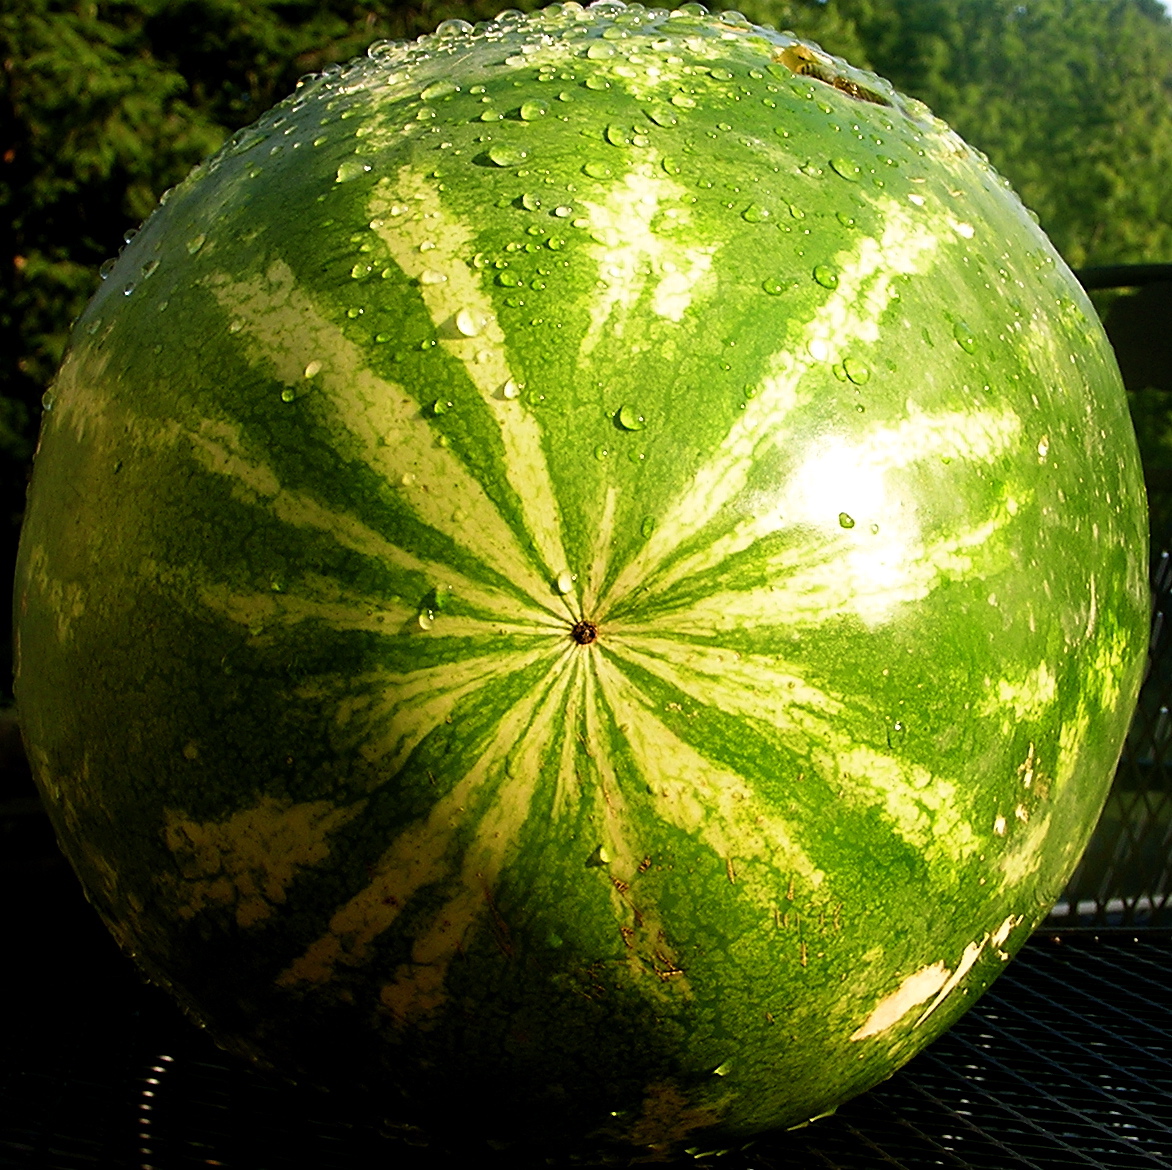 a watermelon sits on a grill with green trees in the background